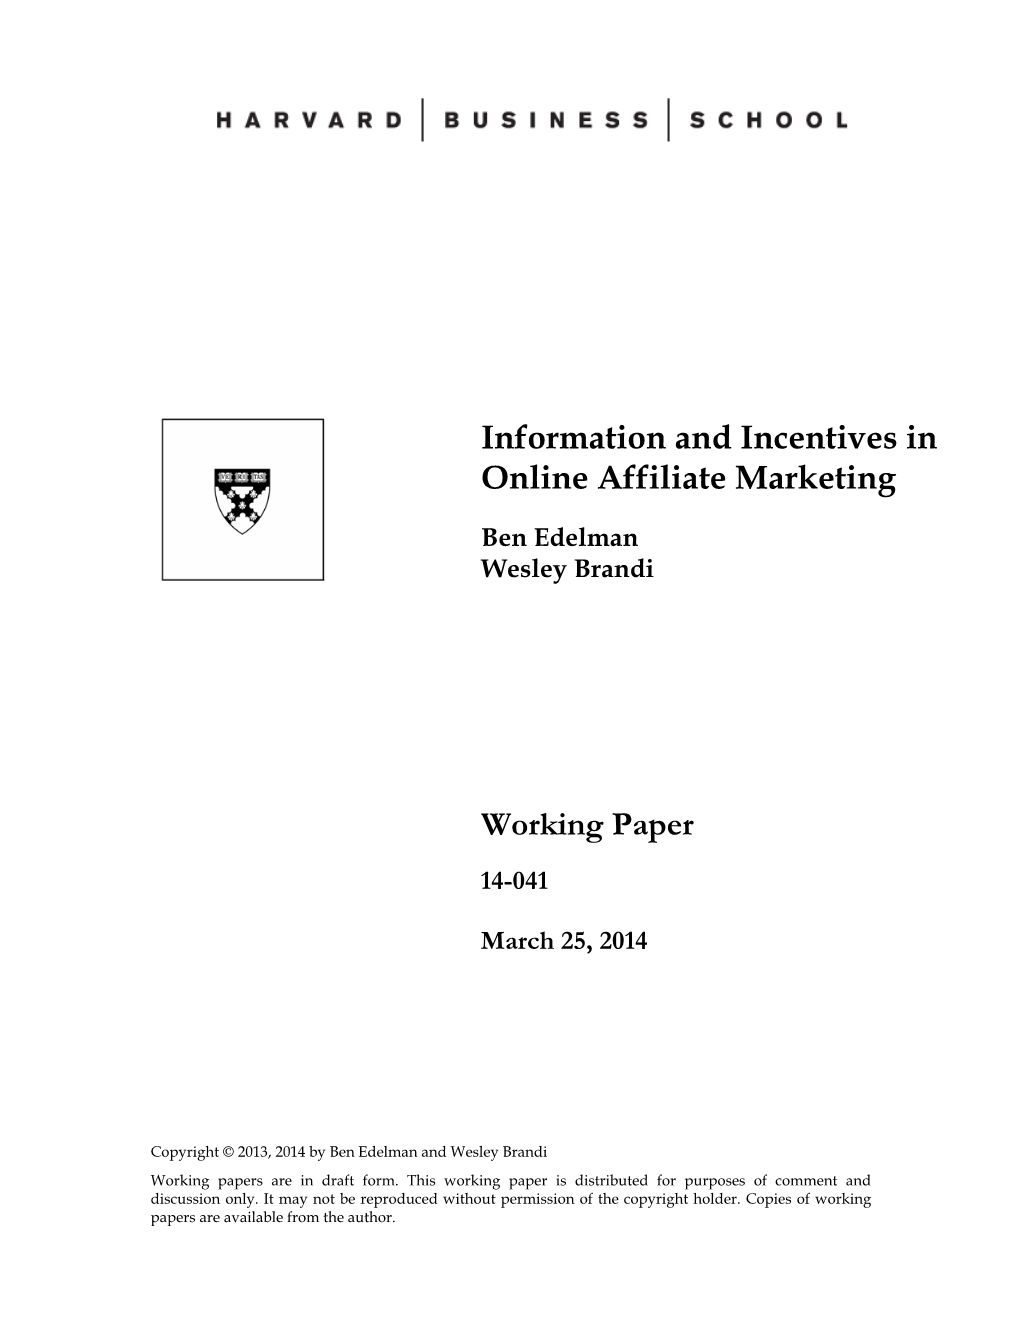 Information and Incentives in Online Affiliate Marketing